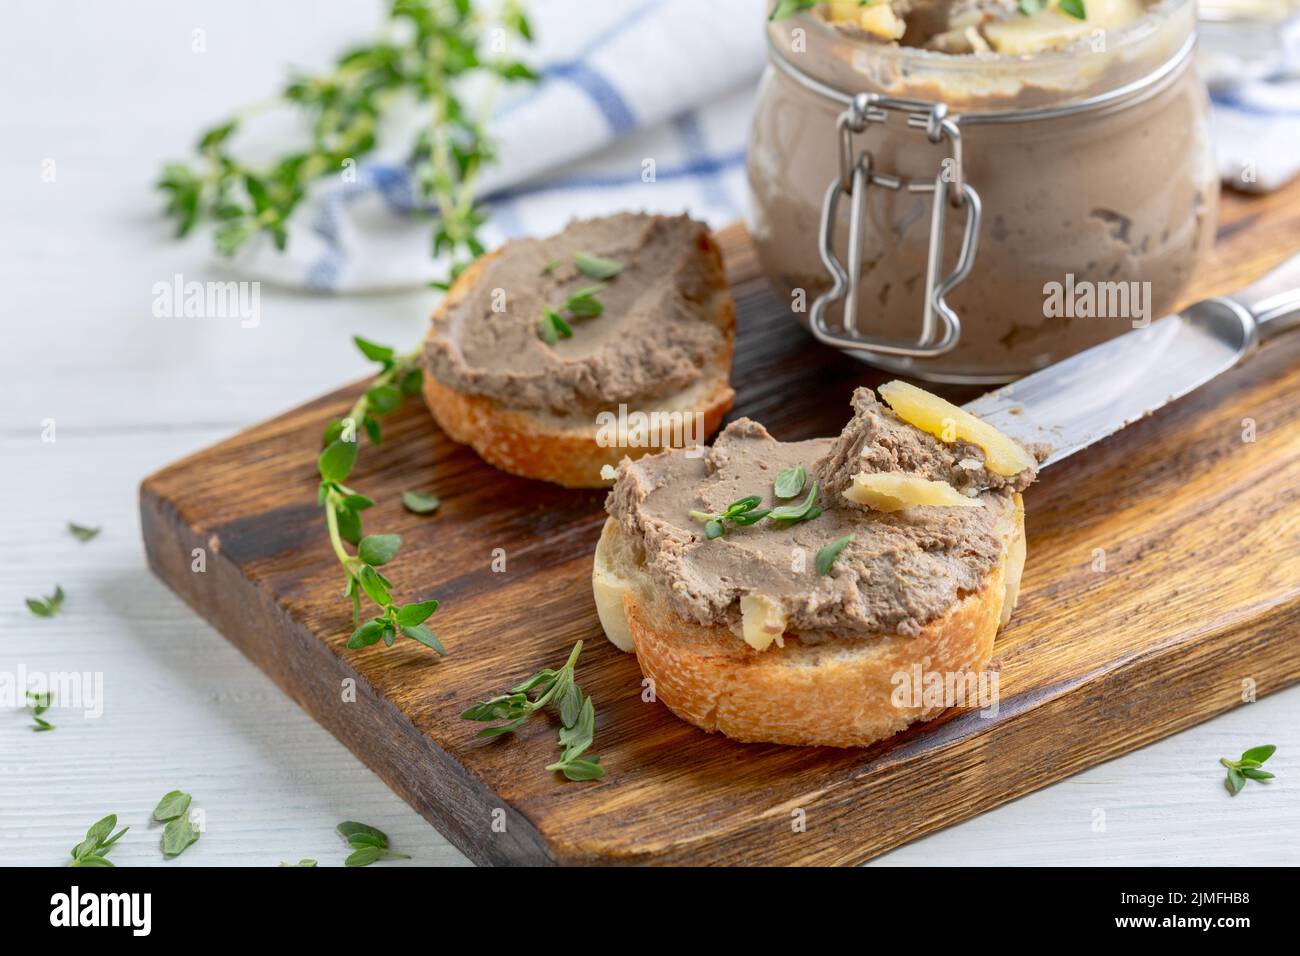 Homemade pate on baguette slices. Stock Photo